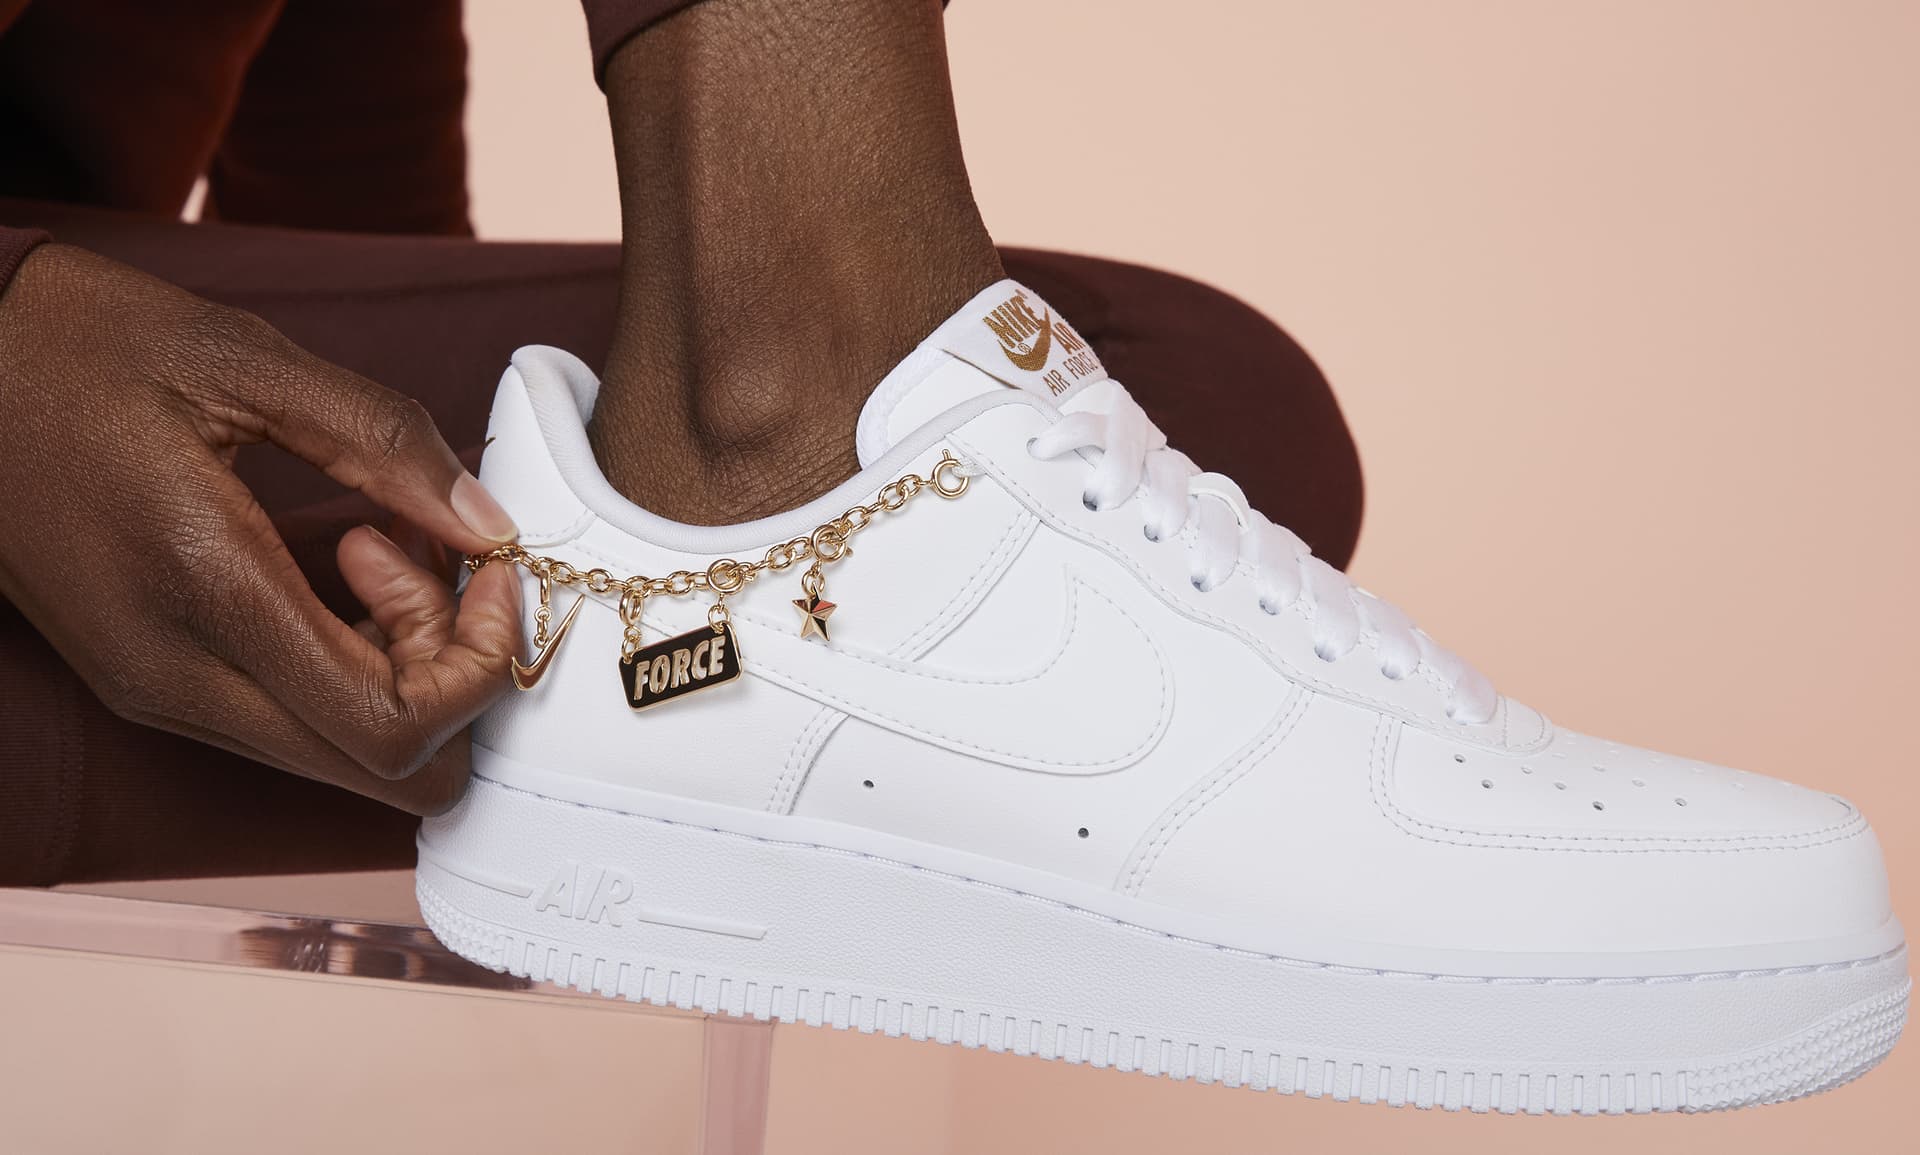 WOMEN'S AIR FORCE 1 '07 LX [DZ2708 - nike air women hedges and